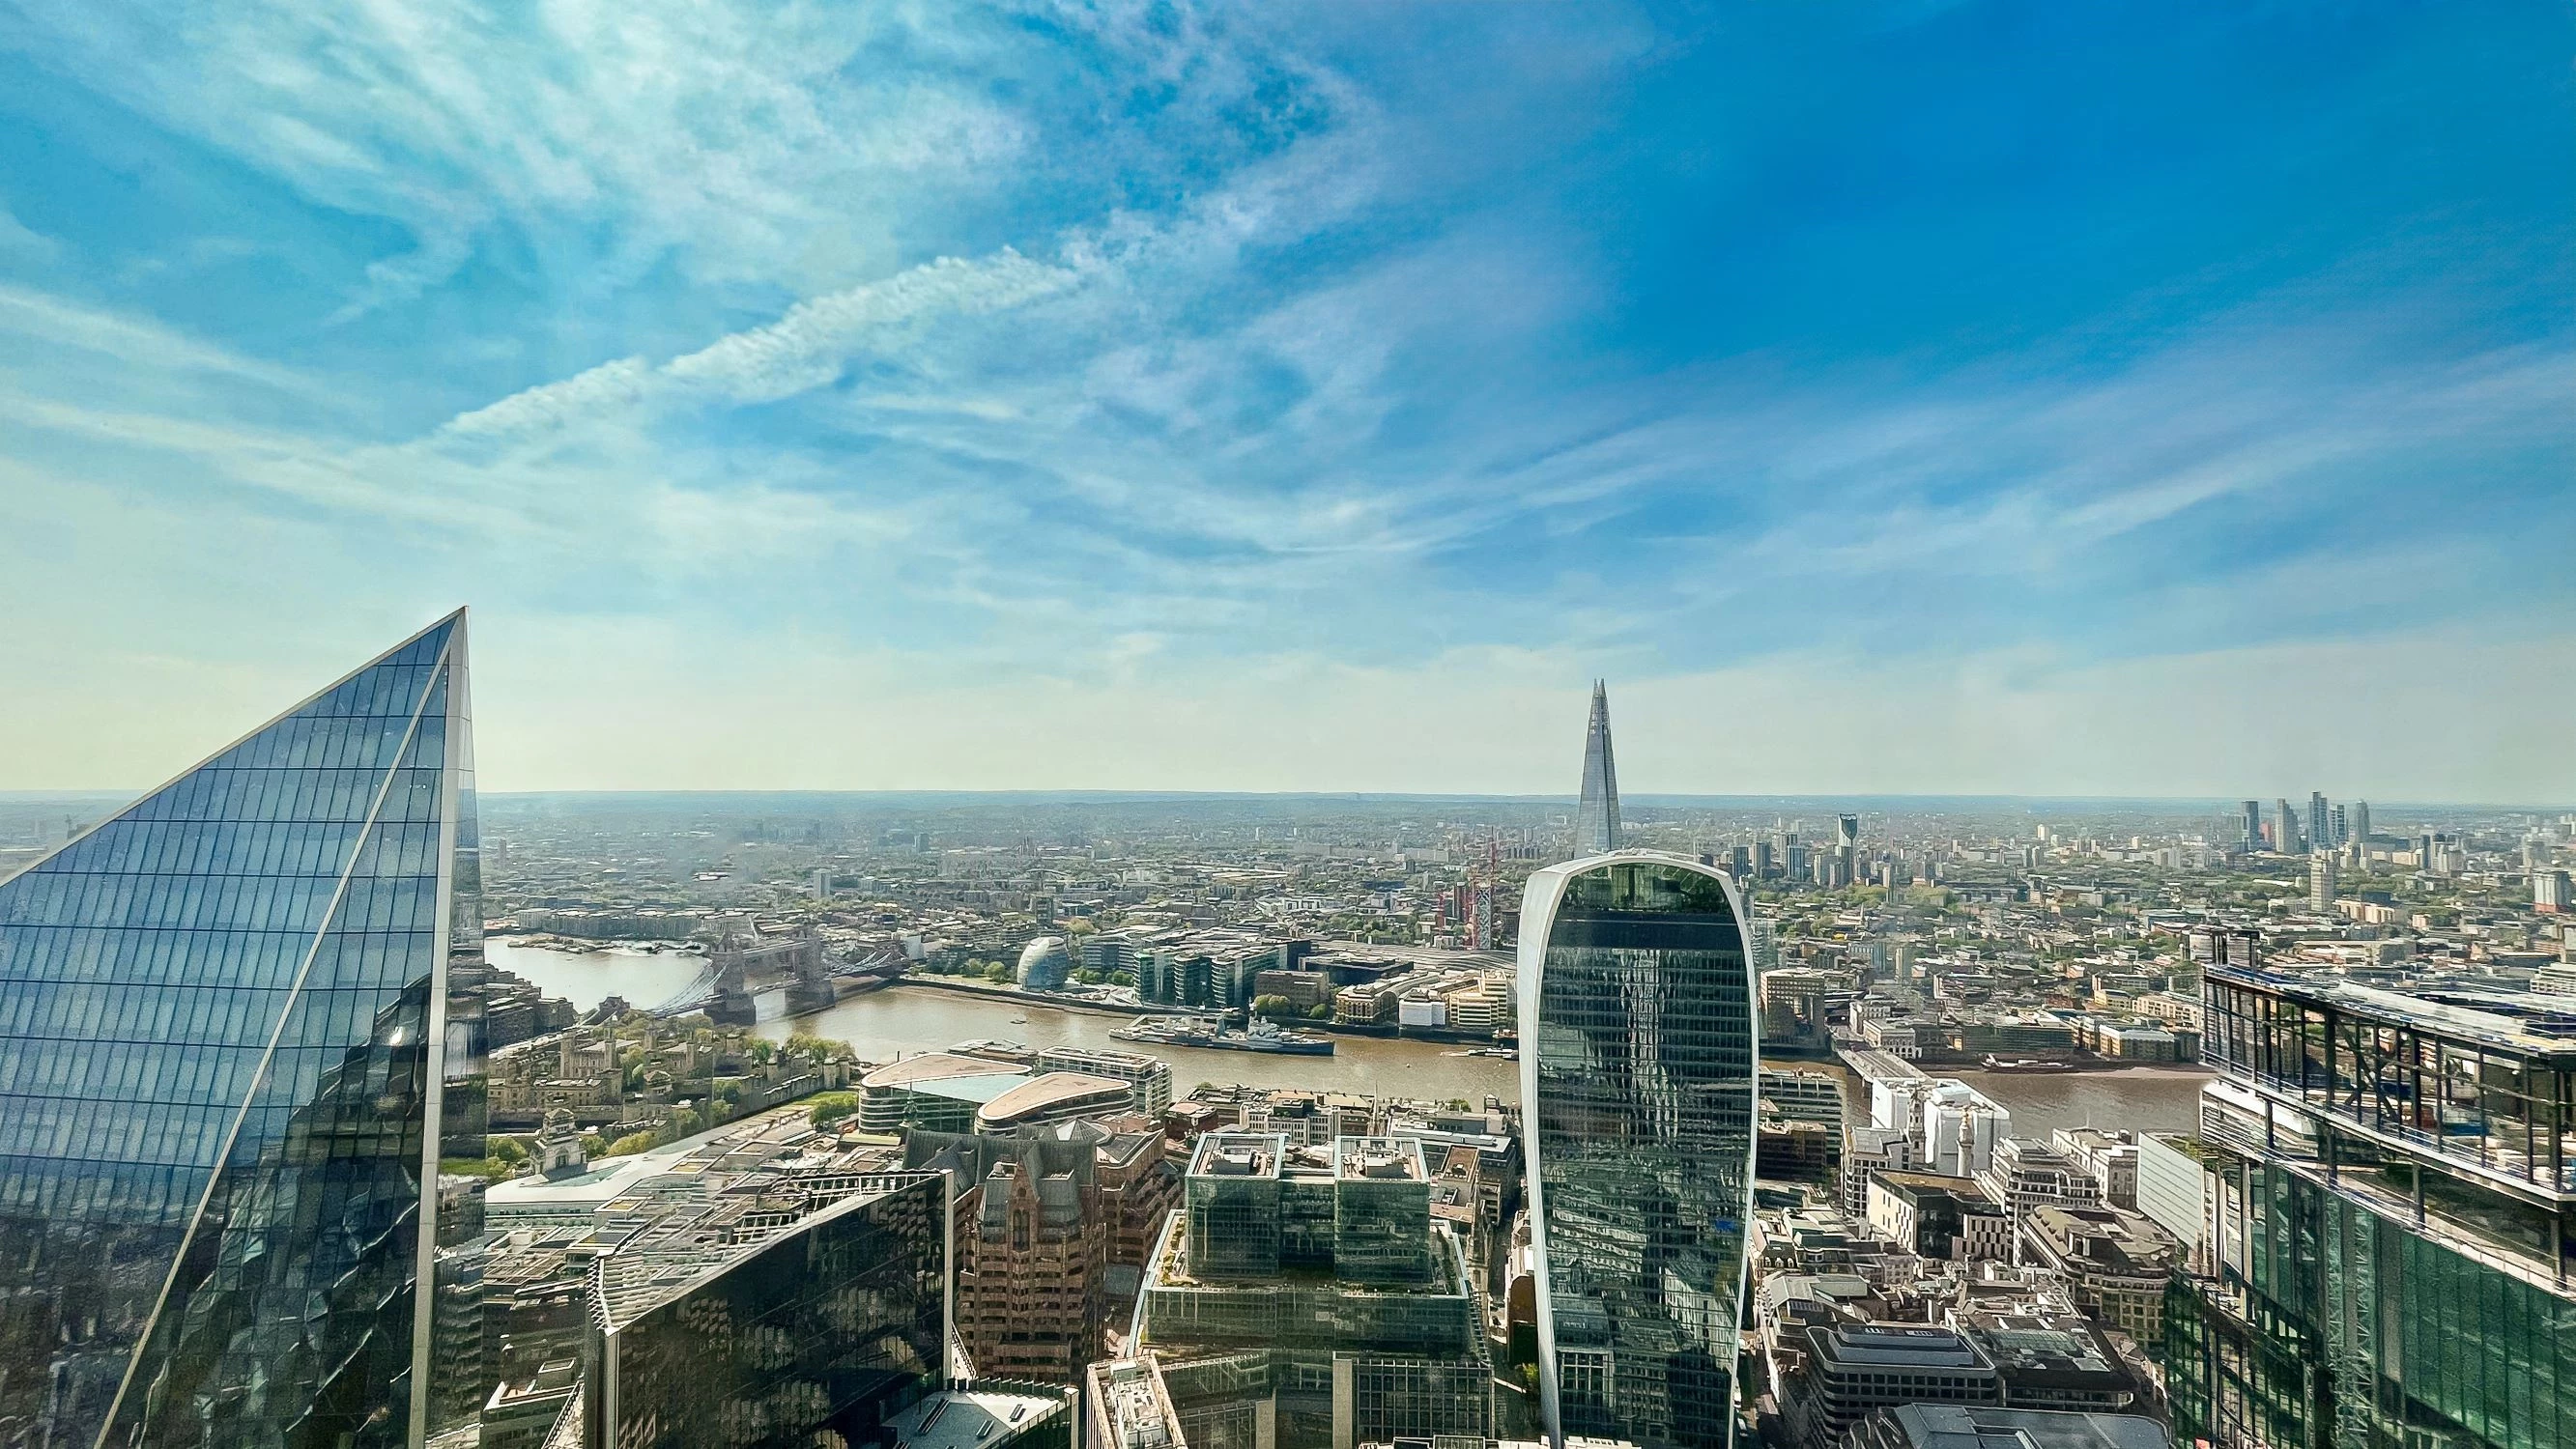 A high-angle view of London under clear blue skies. There is a mix of modern skyscrapers with reflective glass facades, like the Fenchurch Building (also known as The Walkie-Talkie). The River Thames winds through the photograph.